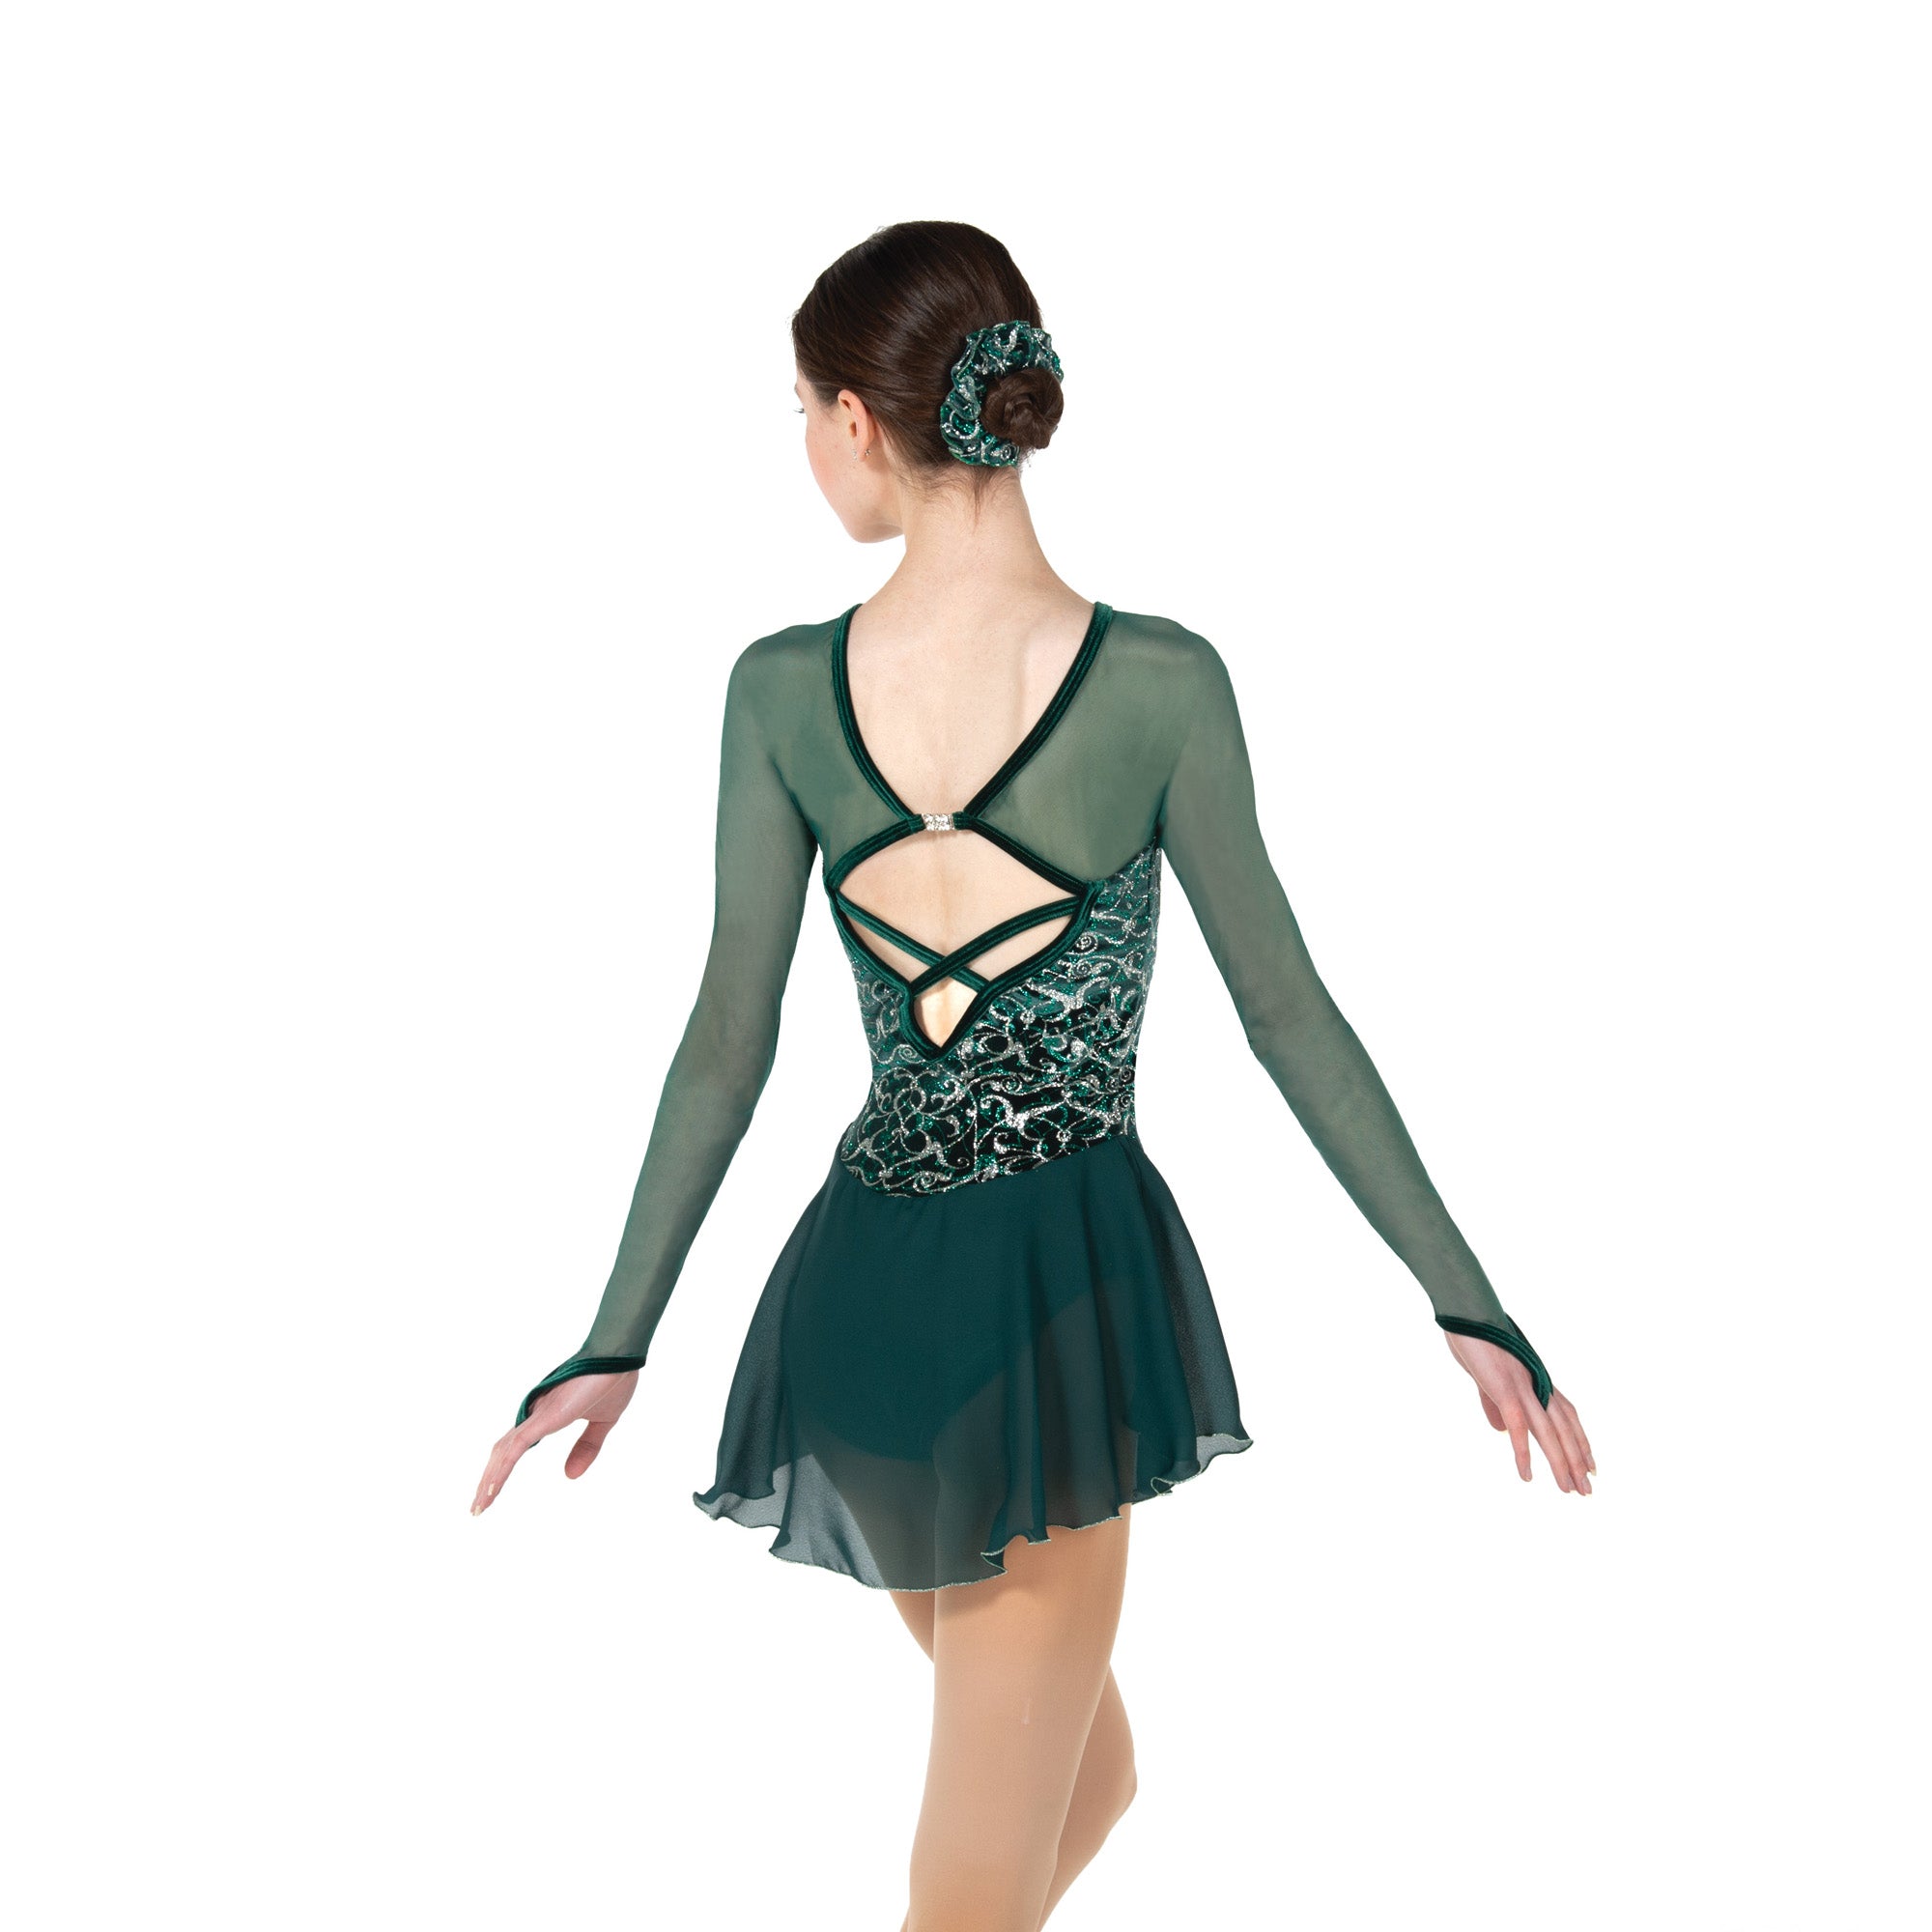 12 Vignette Skating Dress in Pine Green by Jerry's